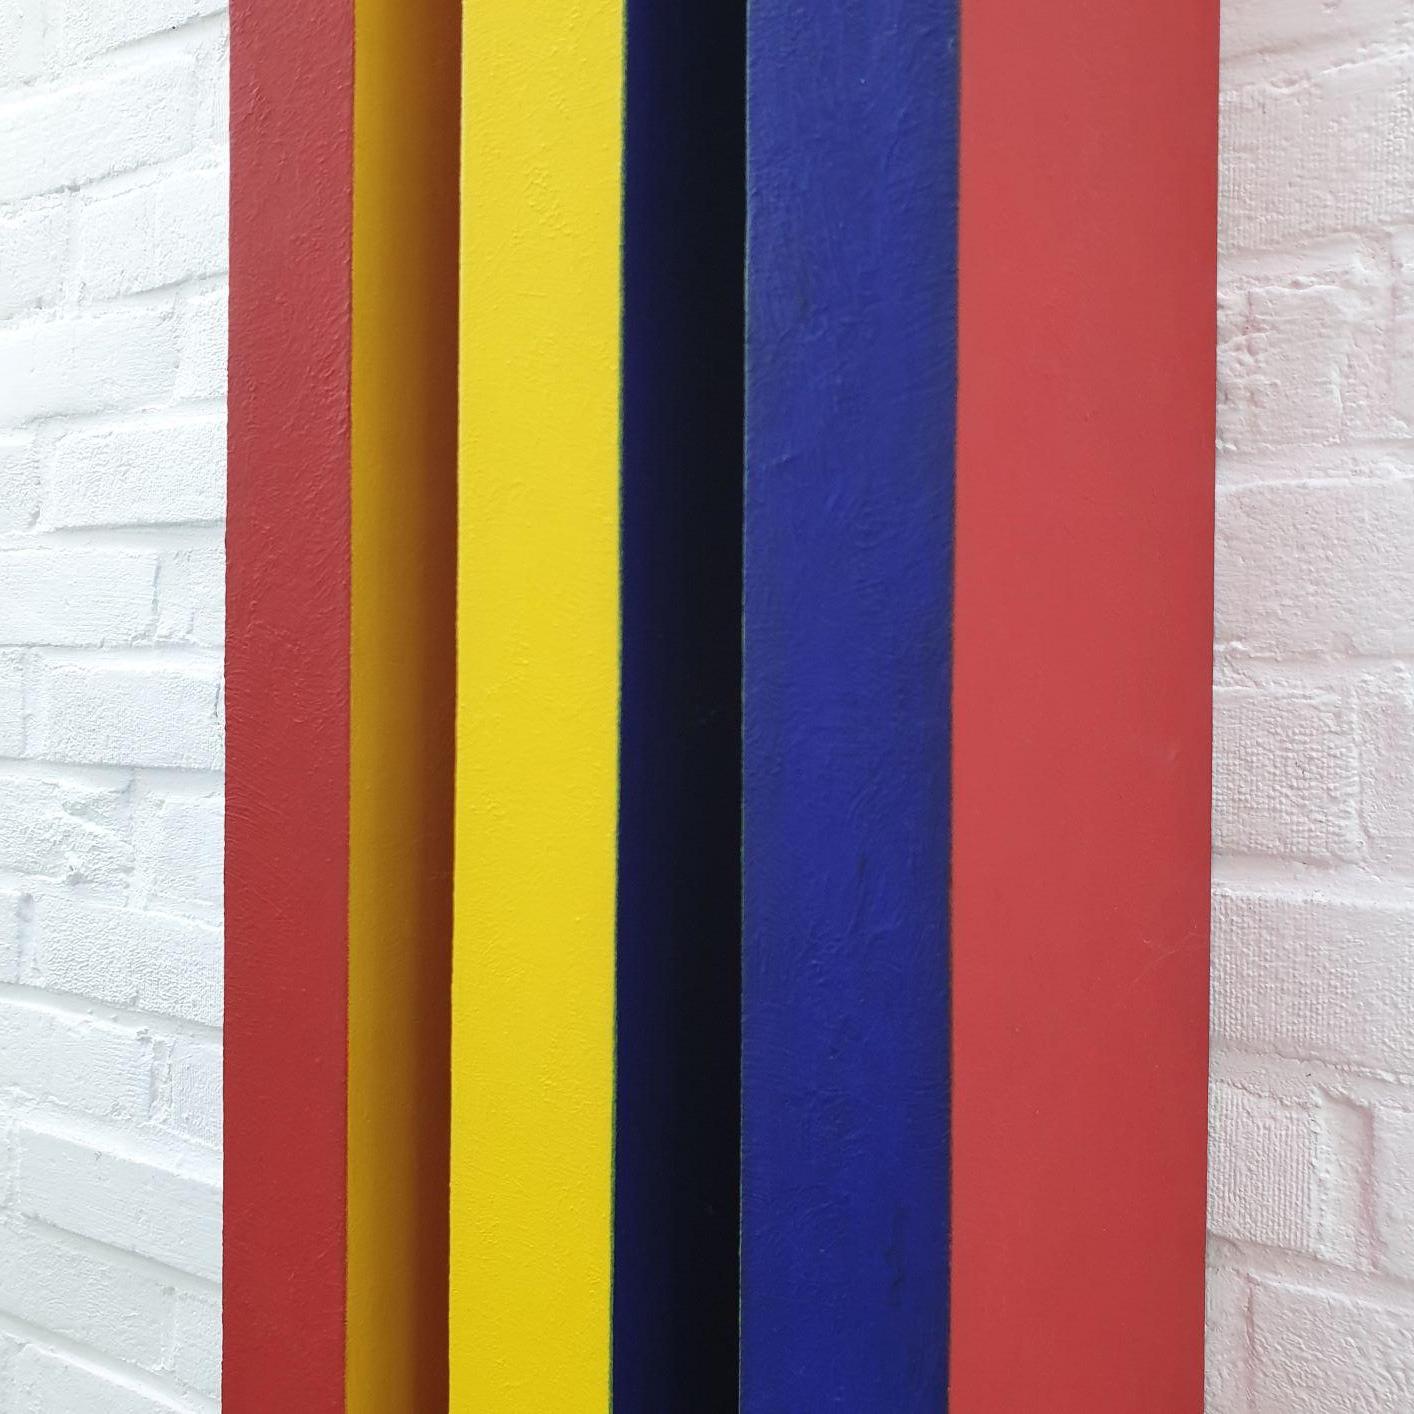 Réflexion des couleurs - red yellow blue contemporary modern painting relief 2